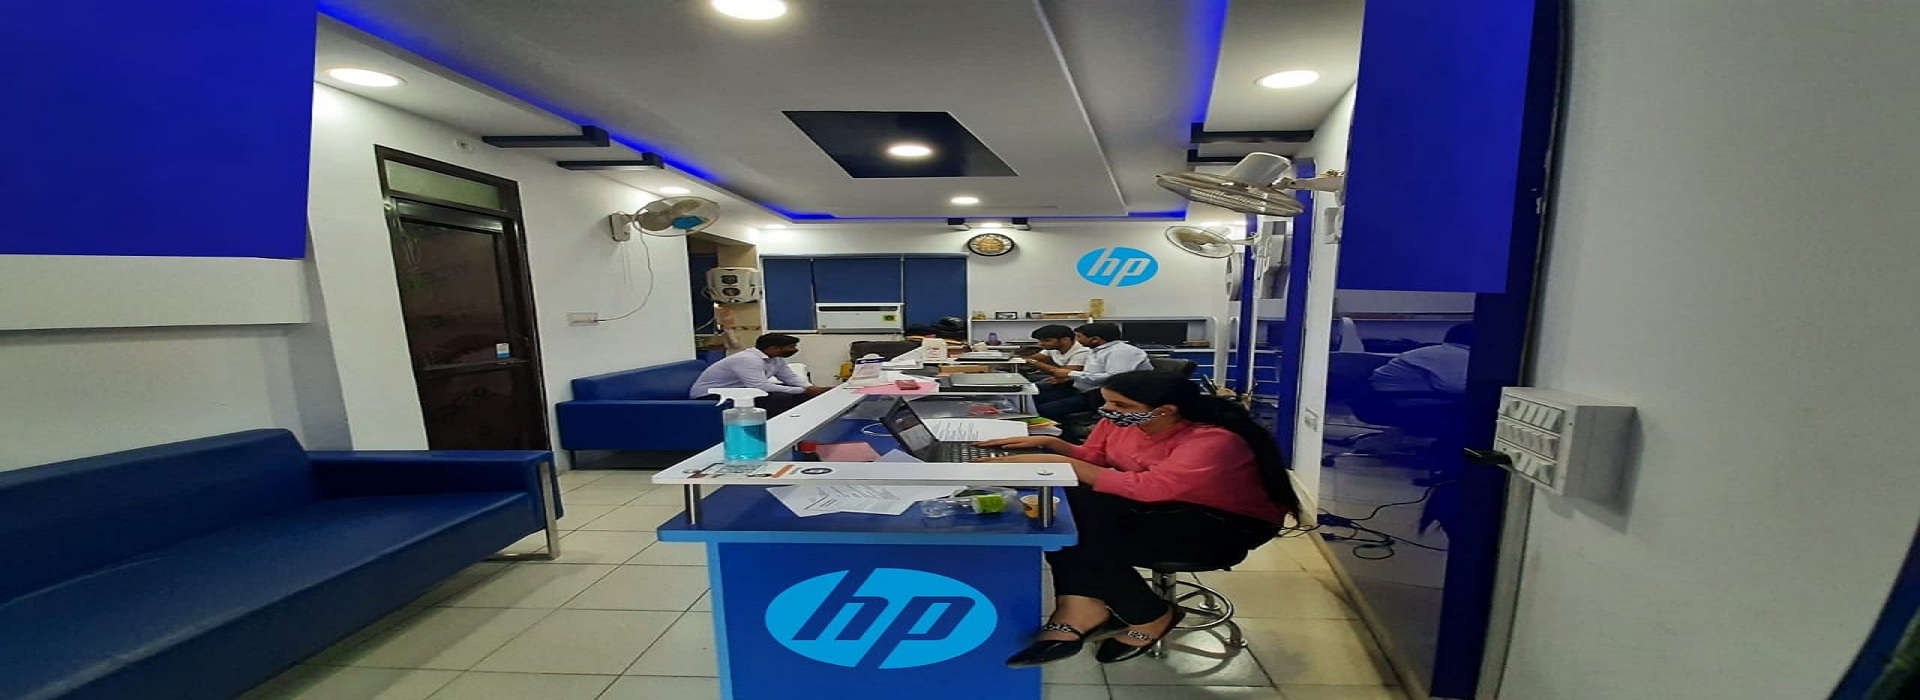 hp Service Centre In Rajendra Place